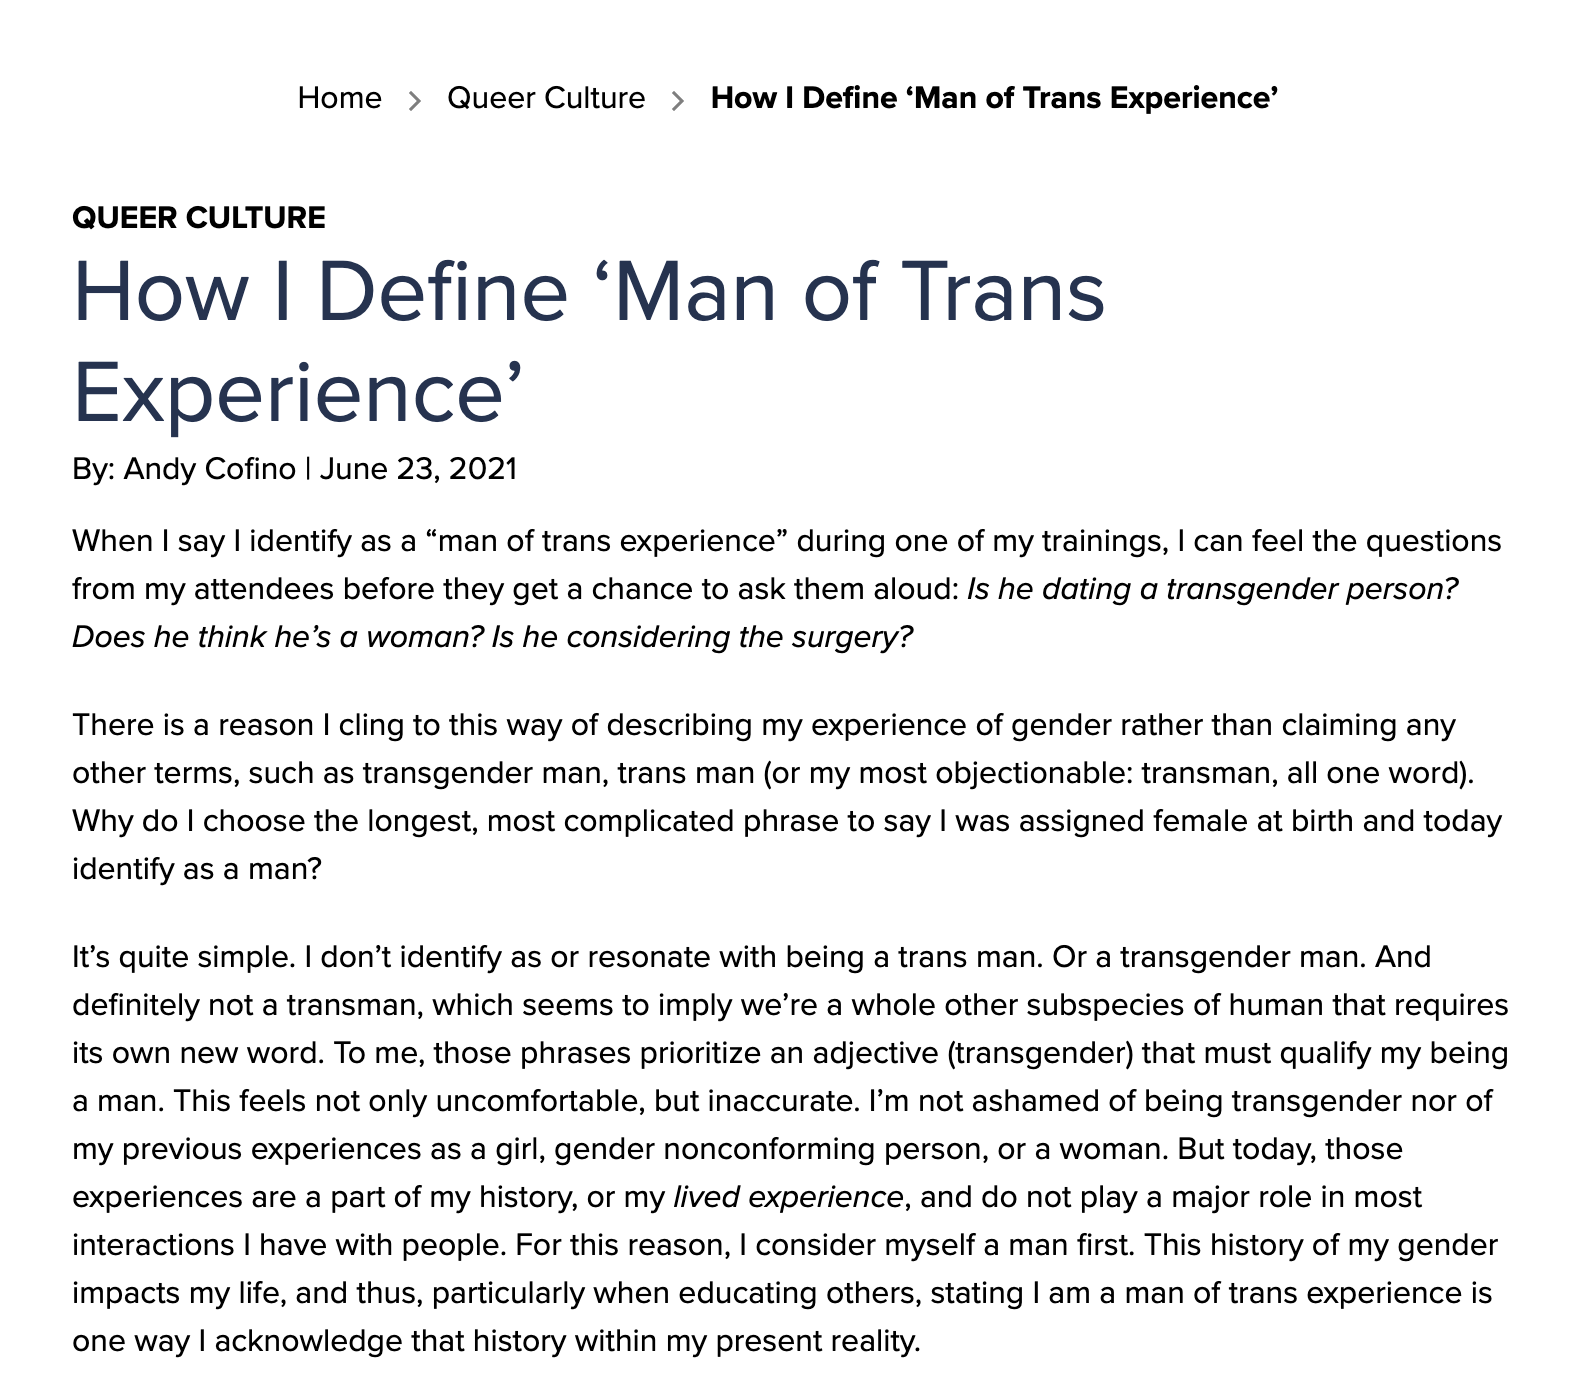 District of Columbia Health: How I Define ‘Man of Trans Experience’